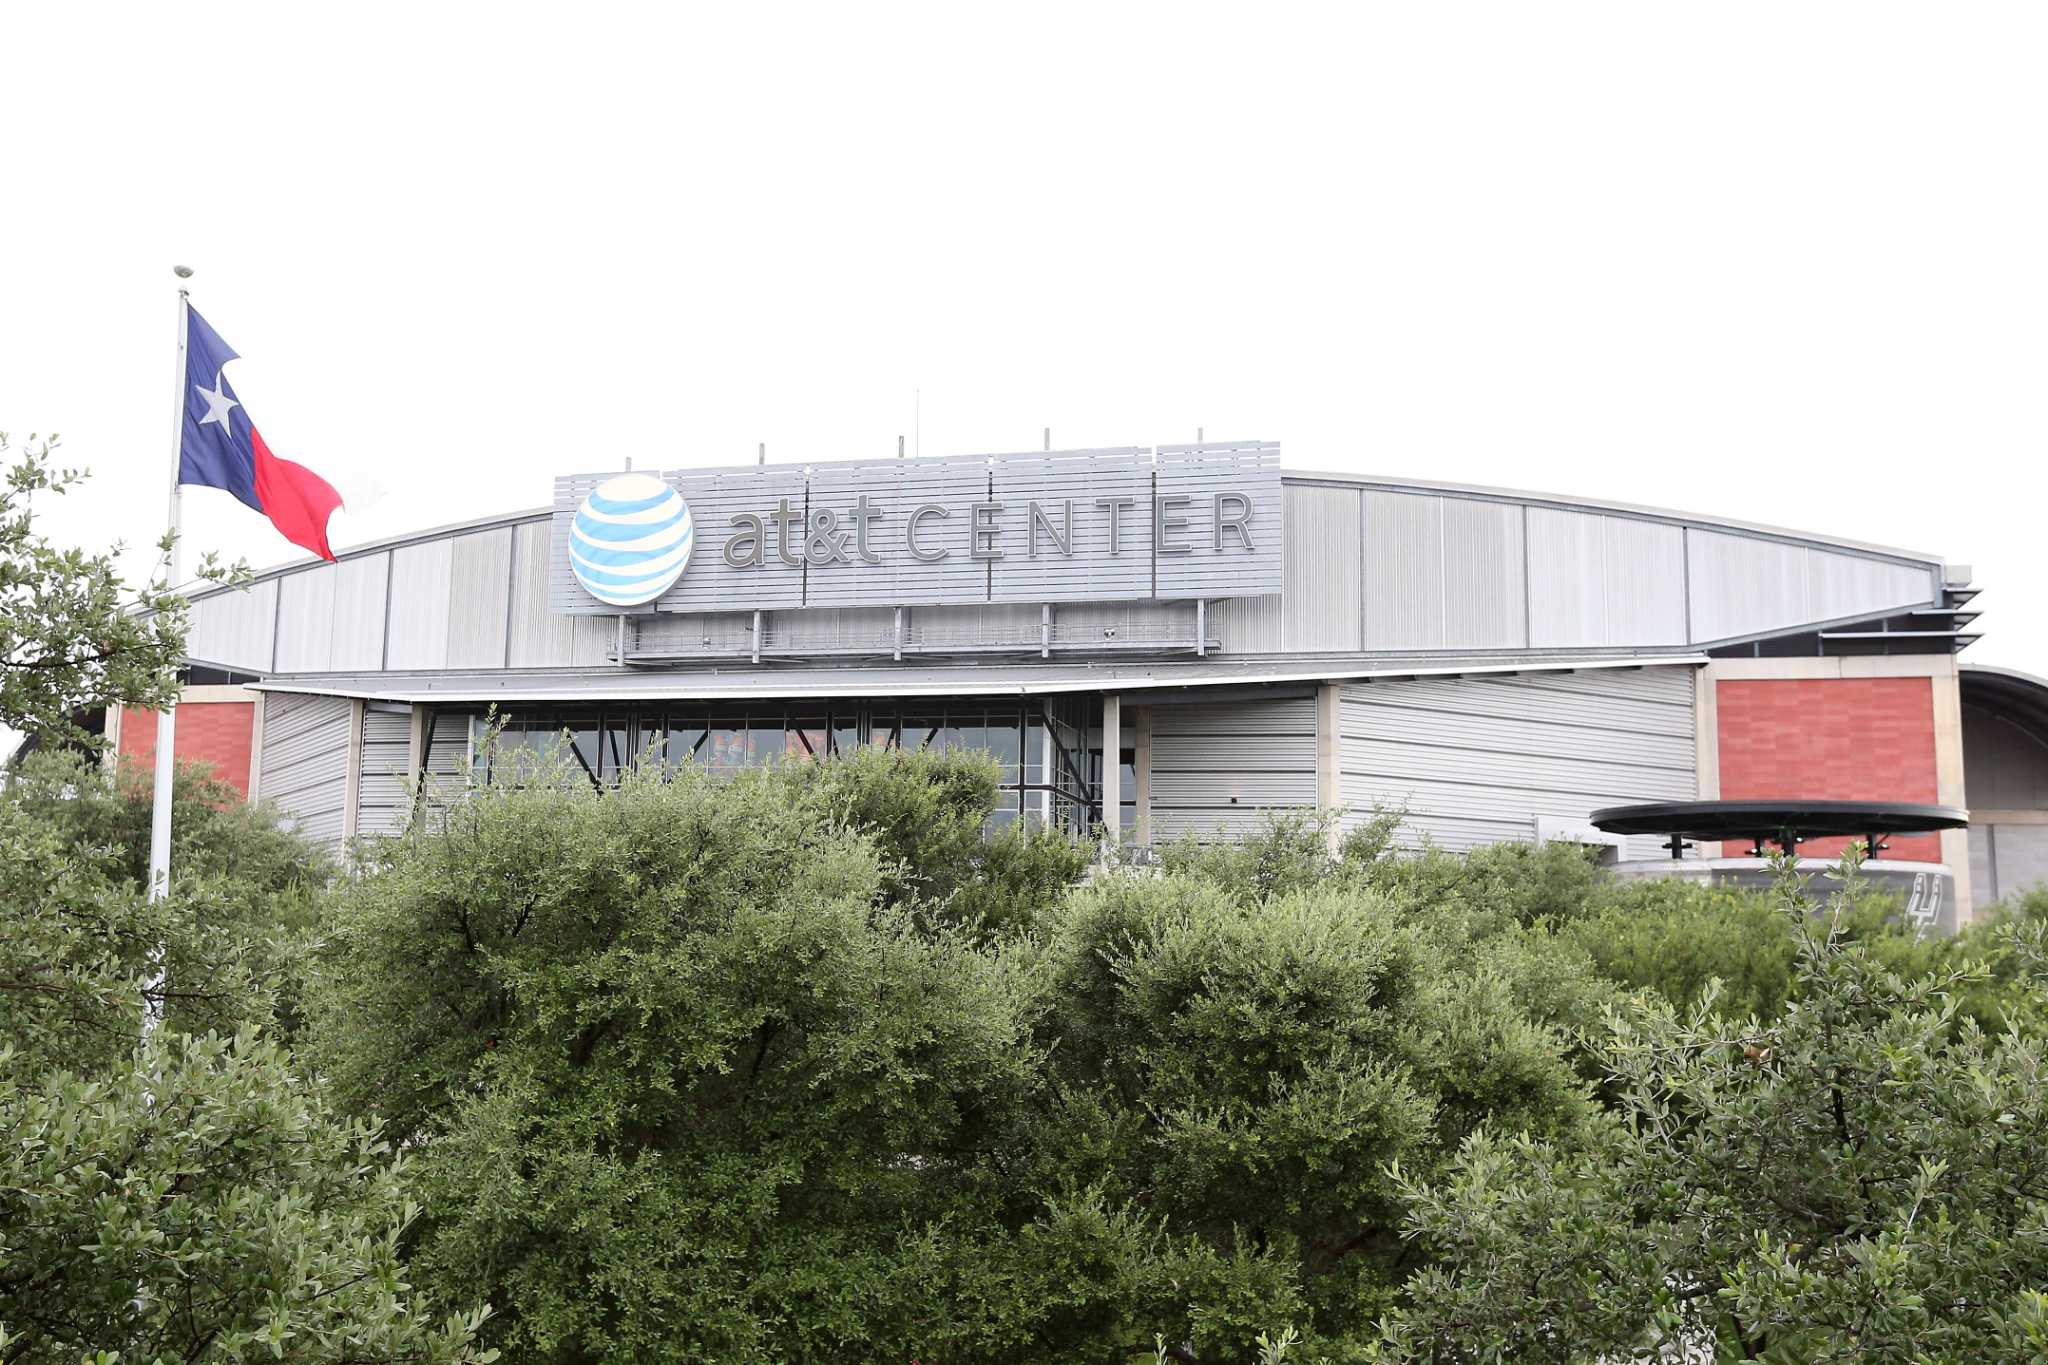 Spurs, Frost Bank to announce a deal for new name for AT&T Center